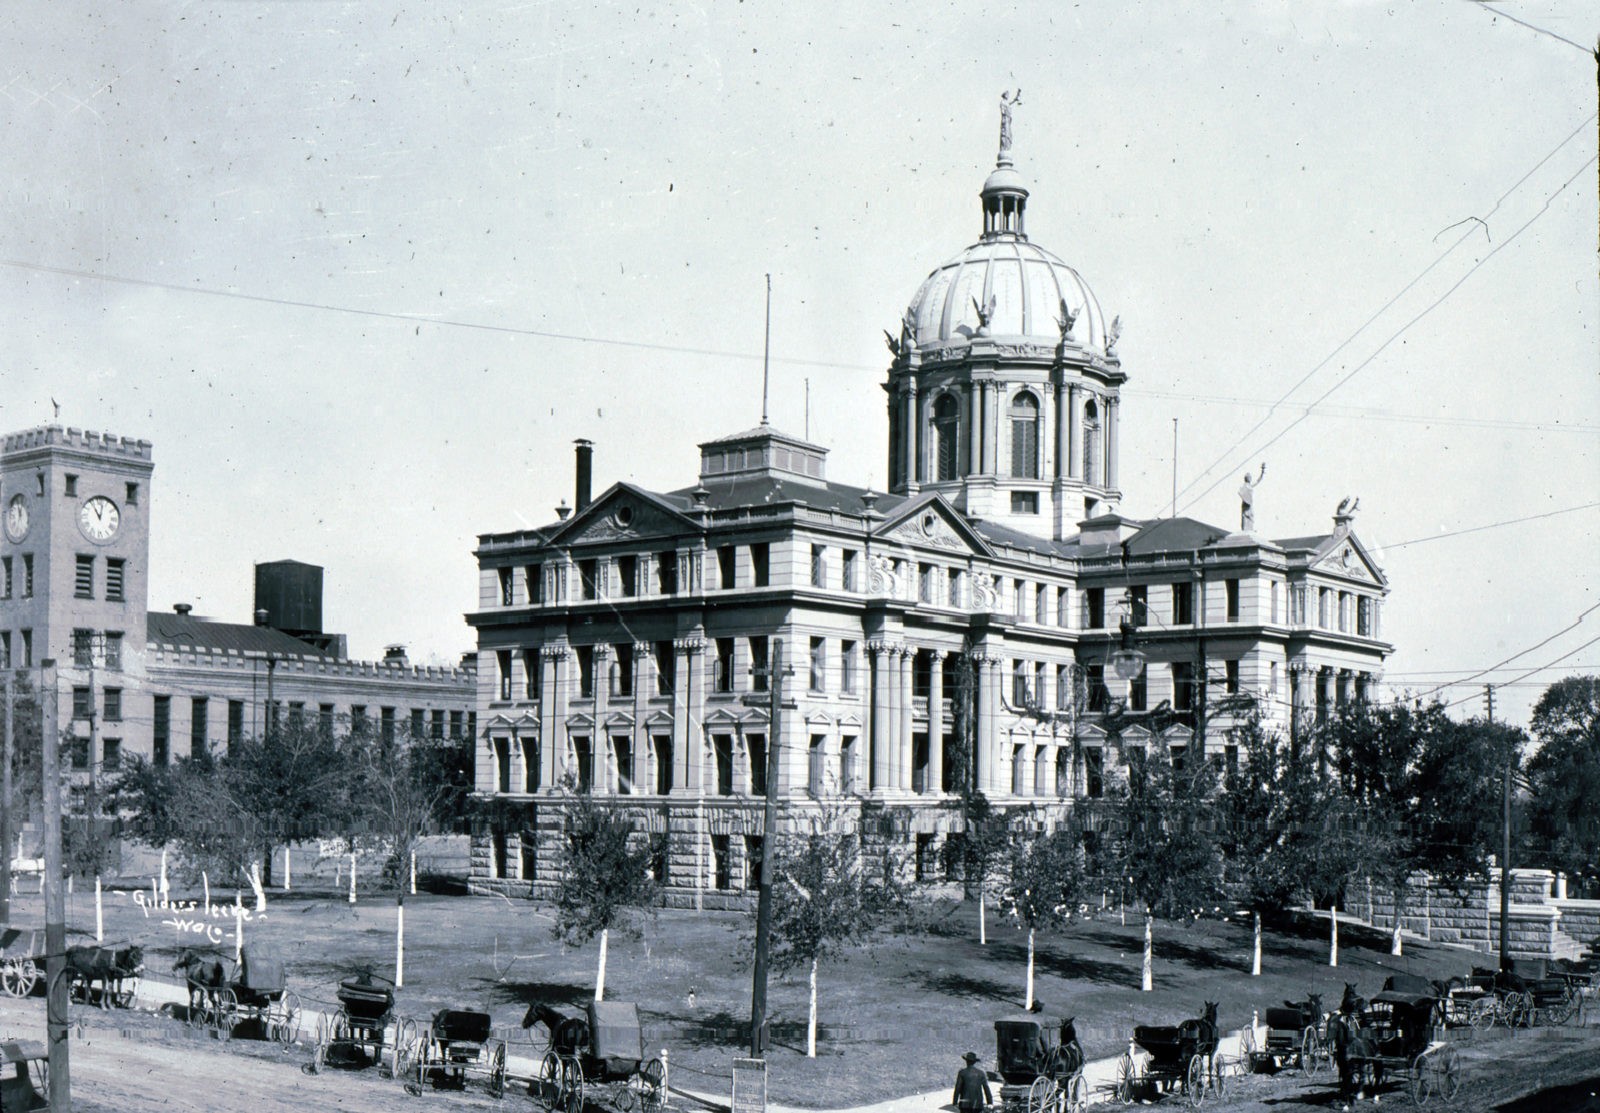 025 - Courthouse & Old Jail - 1912